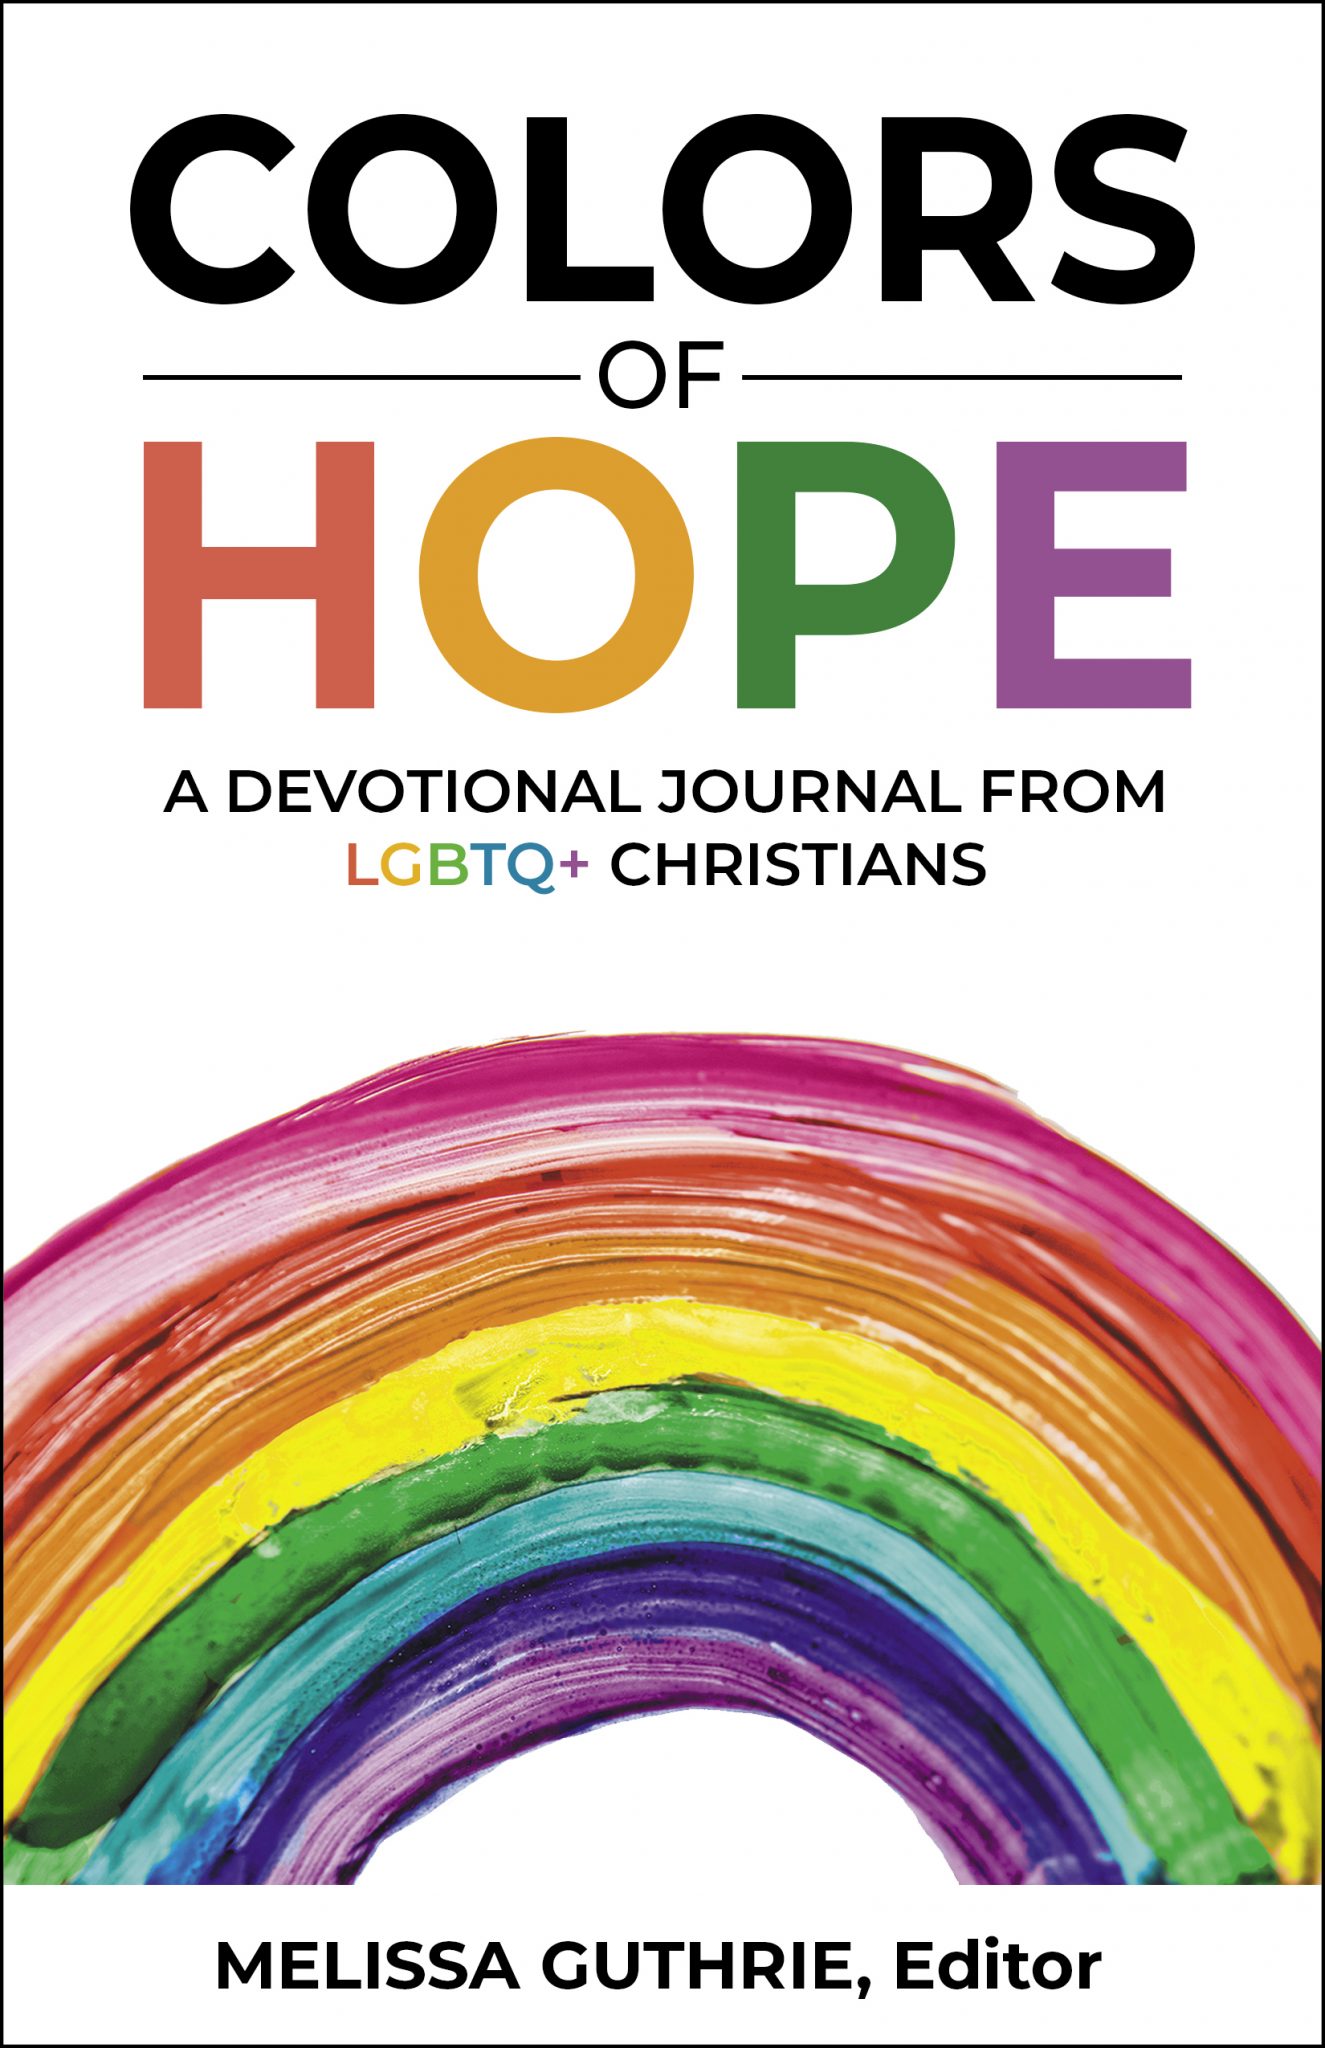 Colors of Hope | The Disciples LGBTQ+ Alliance